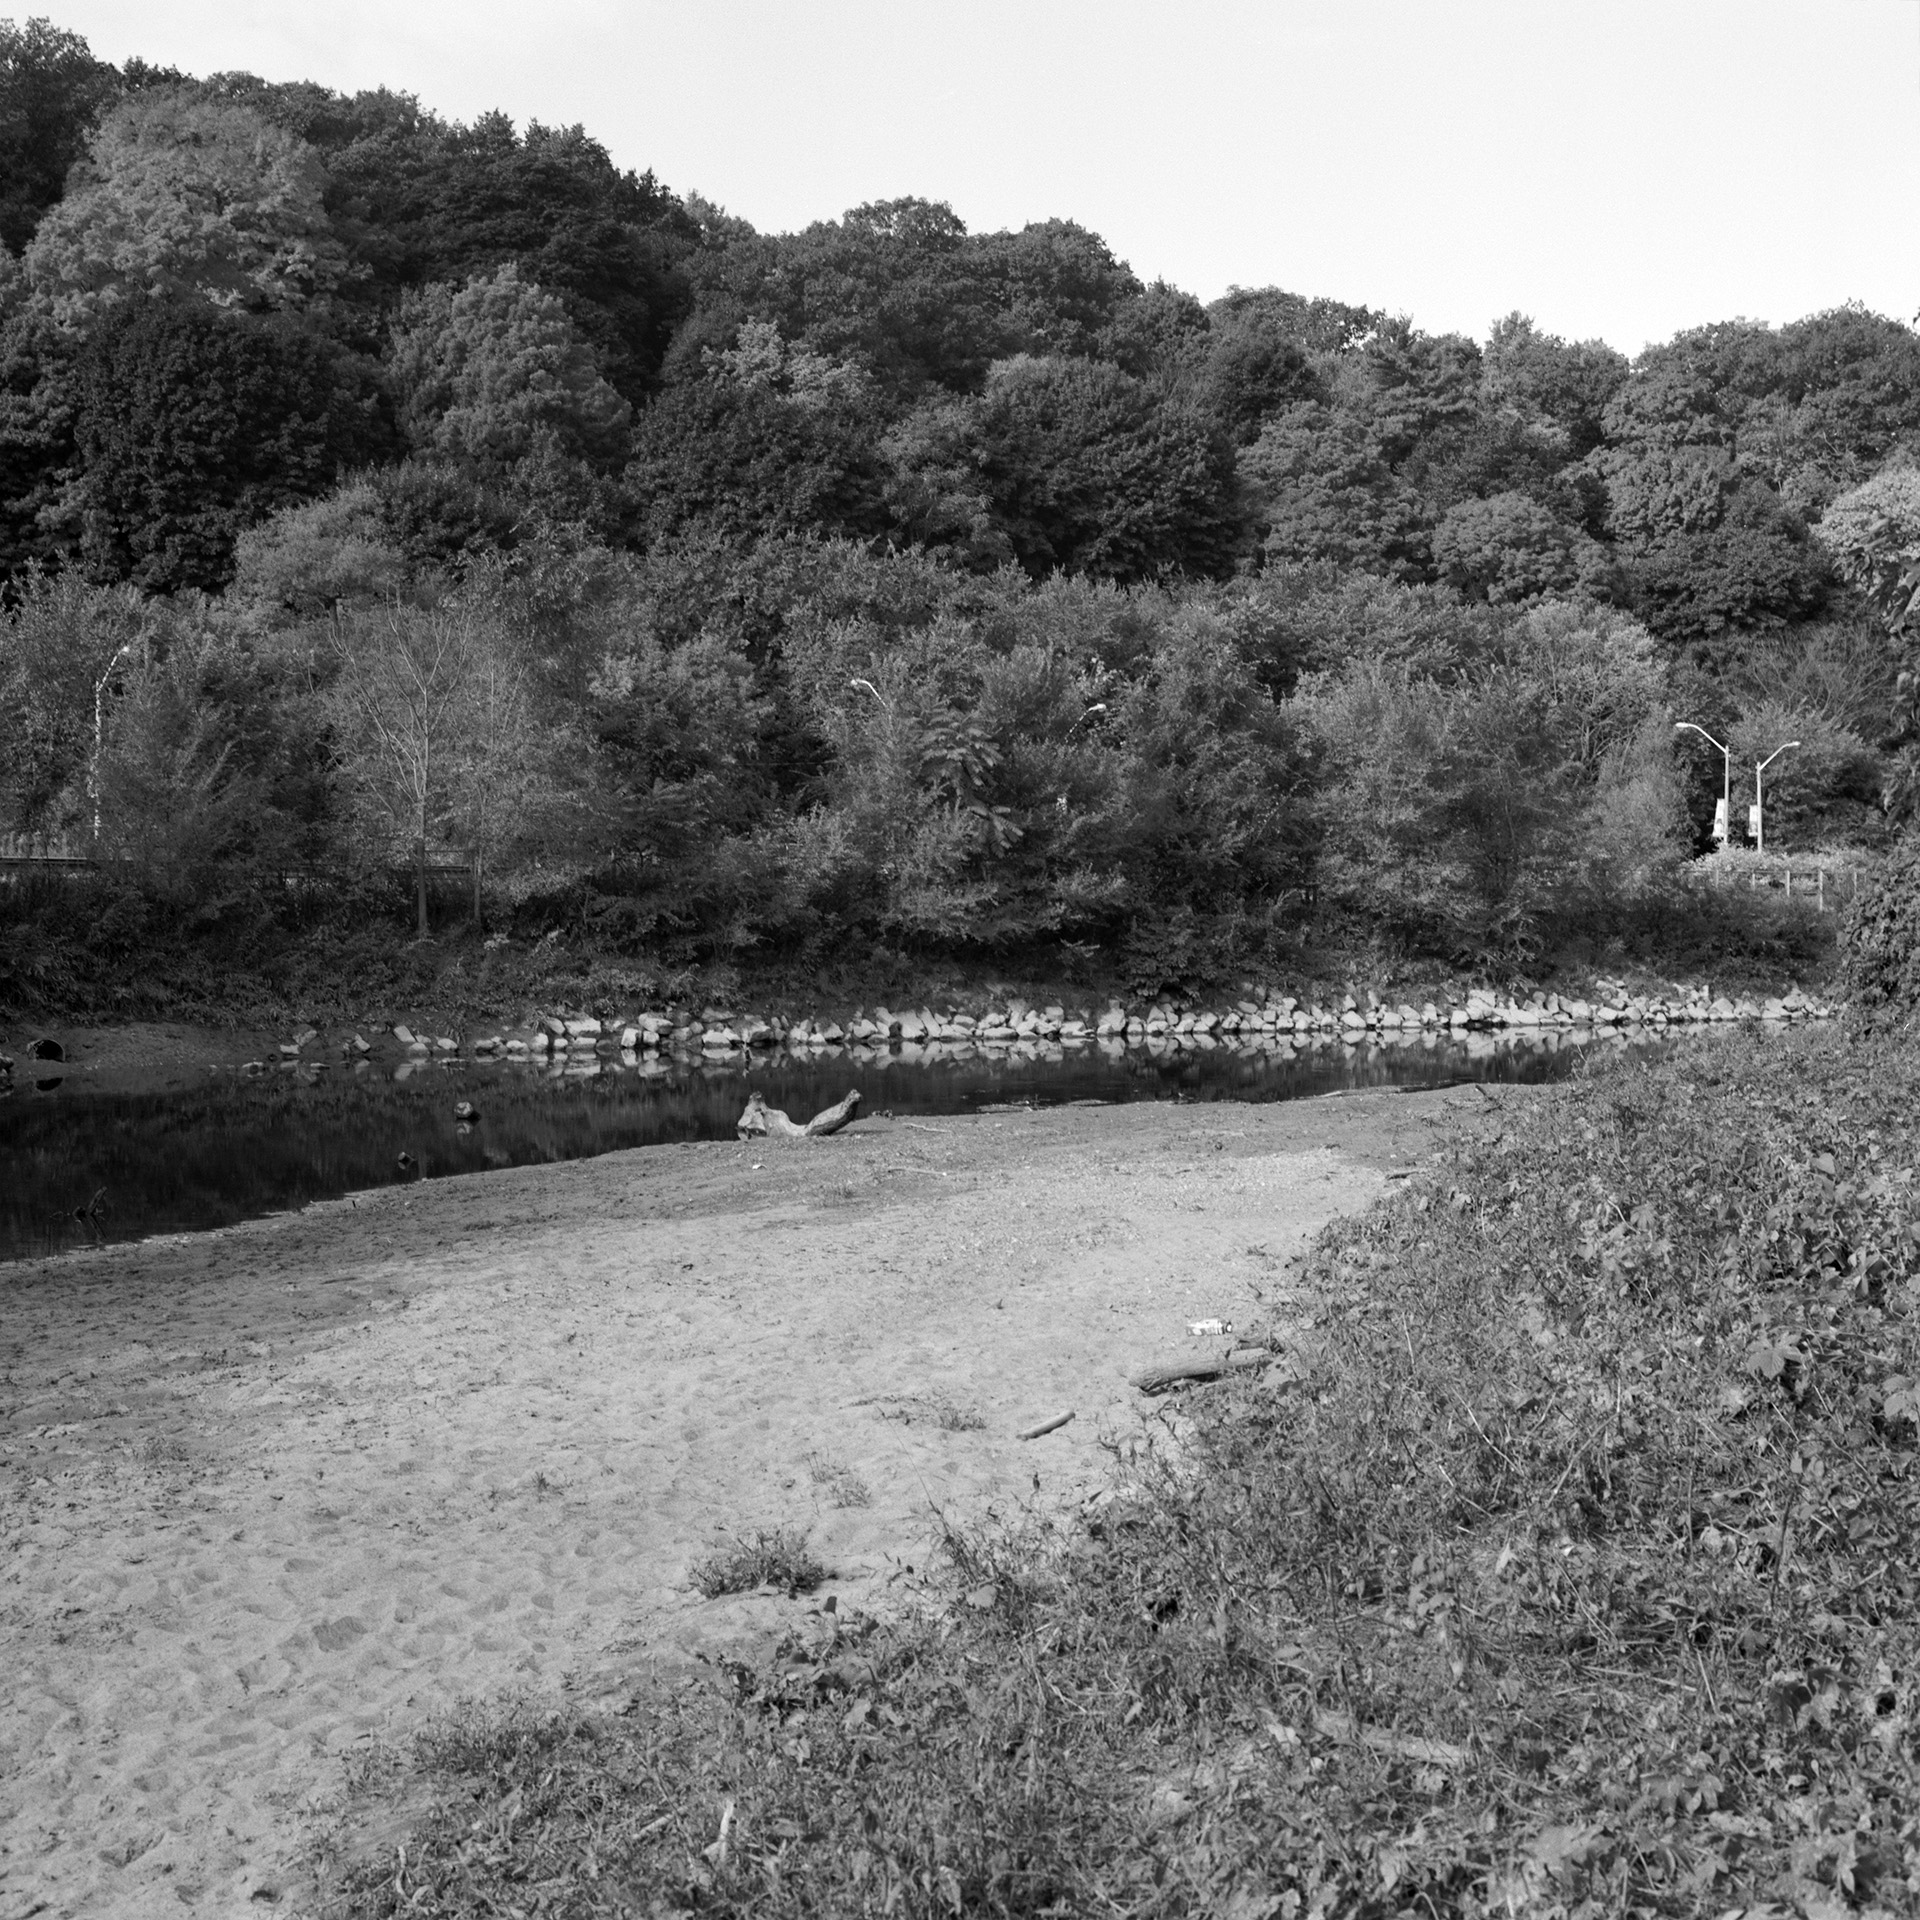 Where The River Runs # 4: A square black and white photograph of a riverside embankment, with the river flowing through the middle of the frame. A roadway can be seen through the thin tree line as tall mature trees frame the background.